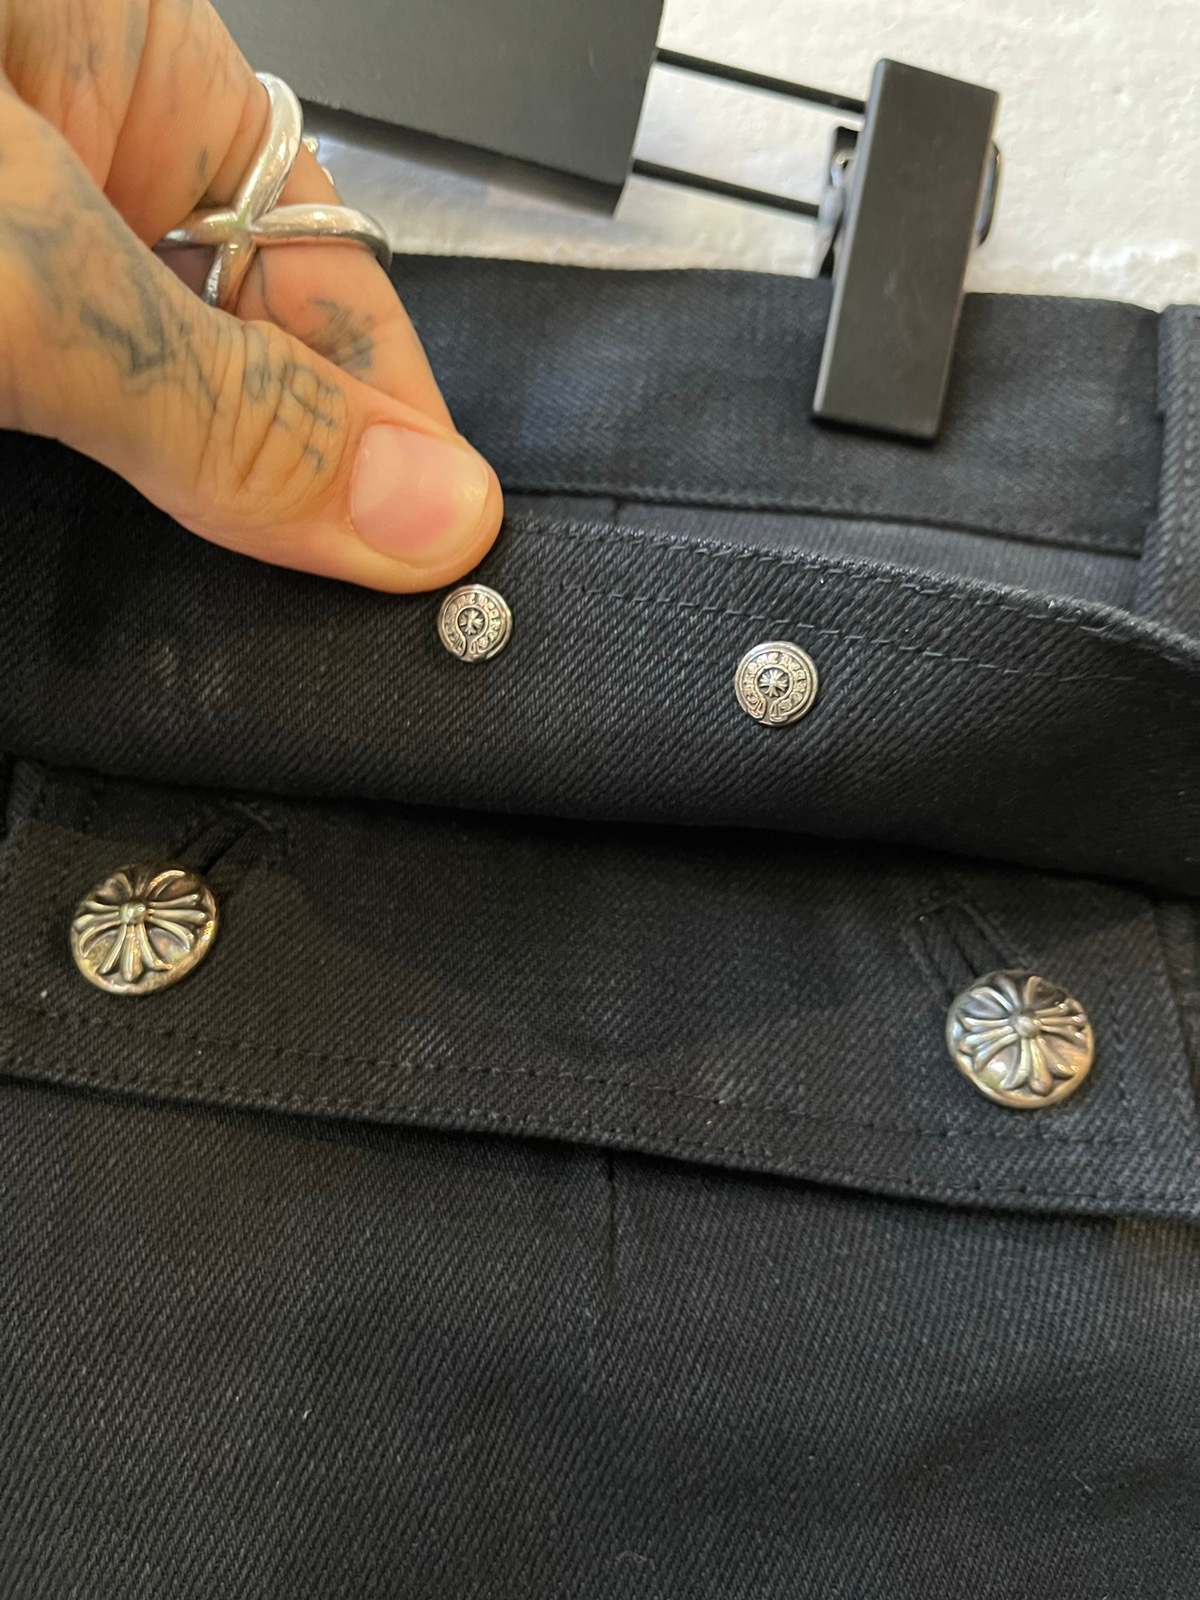 Ikecy fashion - Best quality chrome jeans You can track down